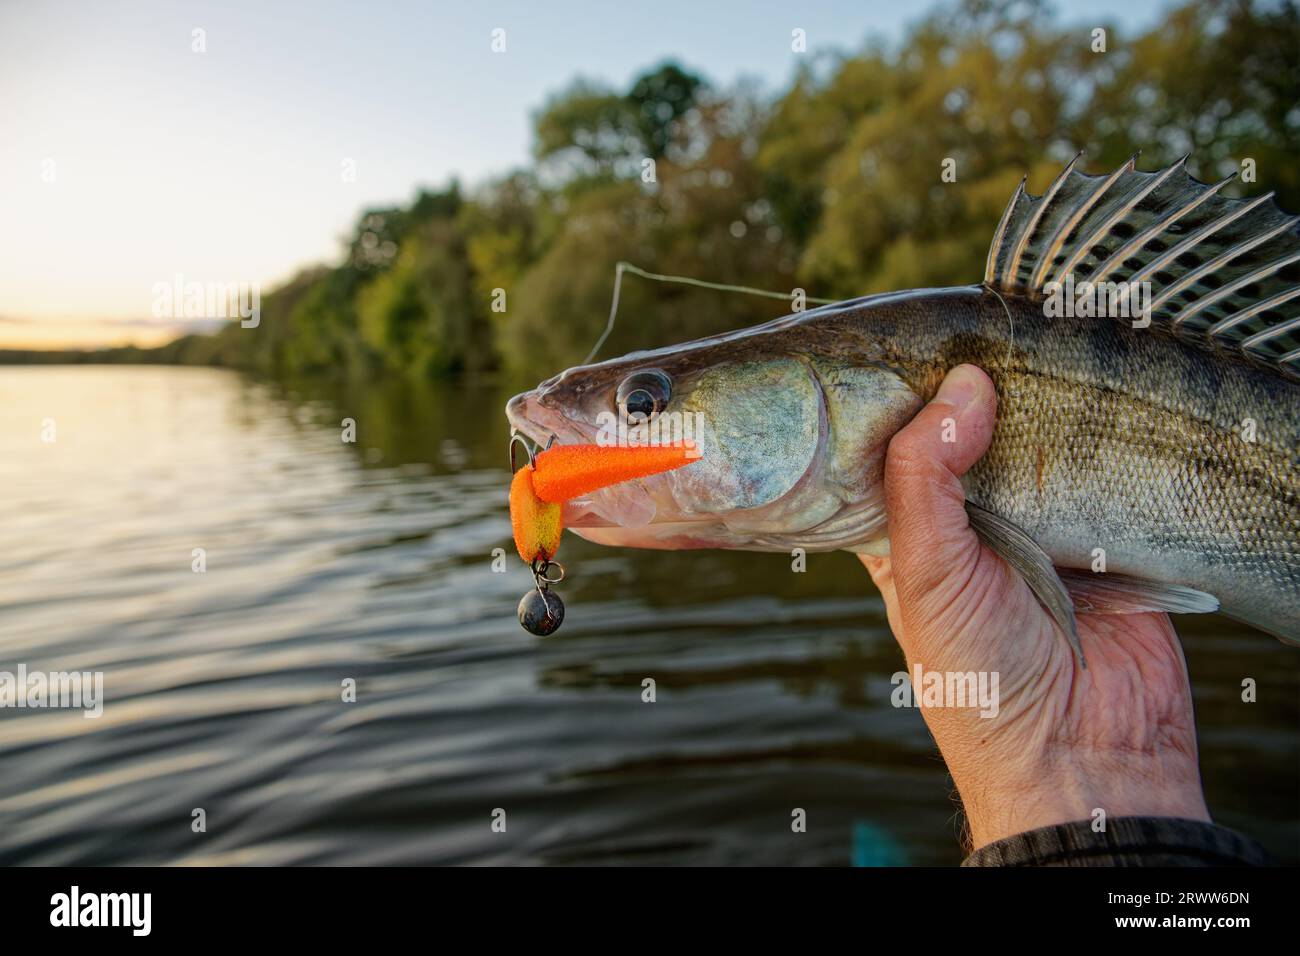 Walleye in fisherman's hand with soft foam lure in mouth, summer